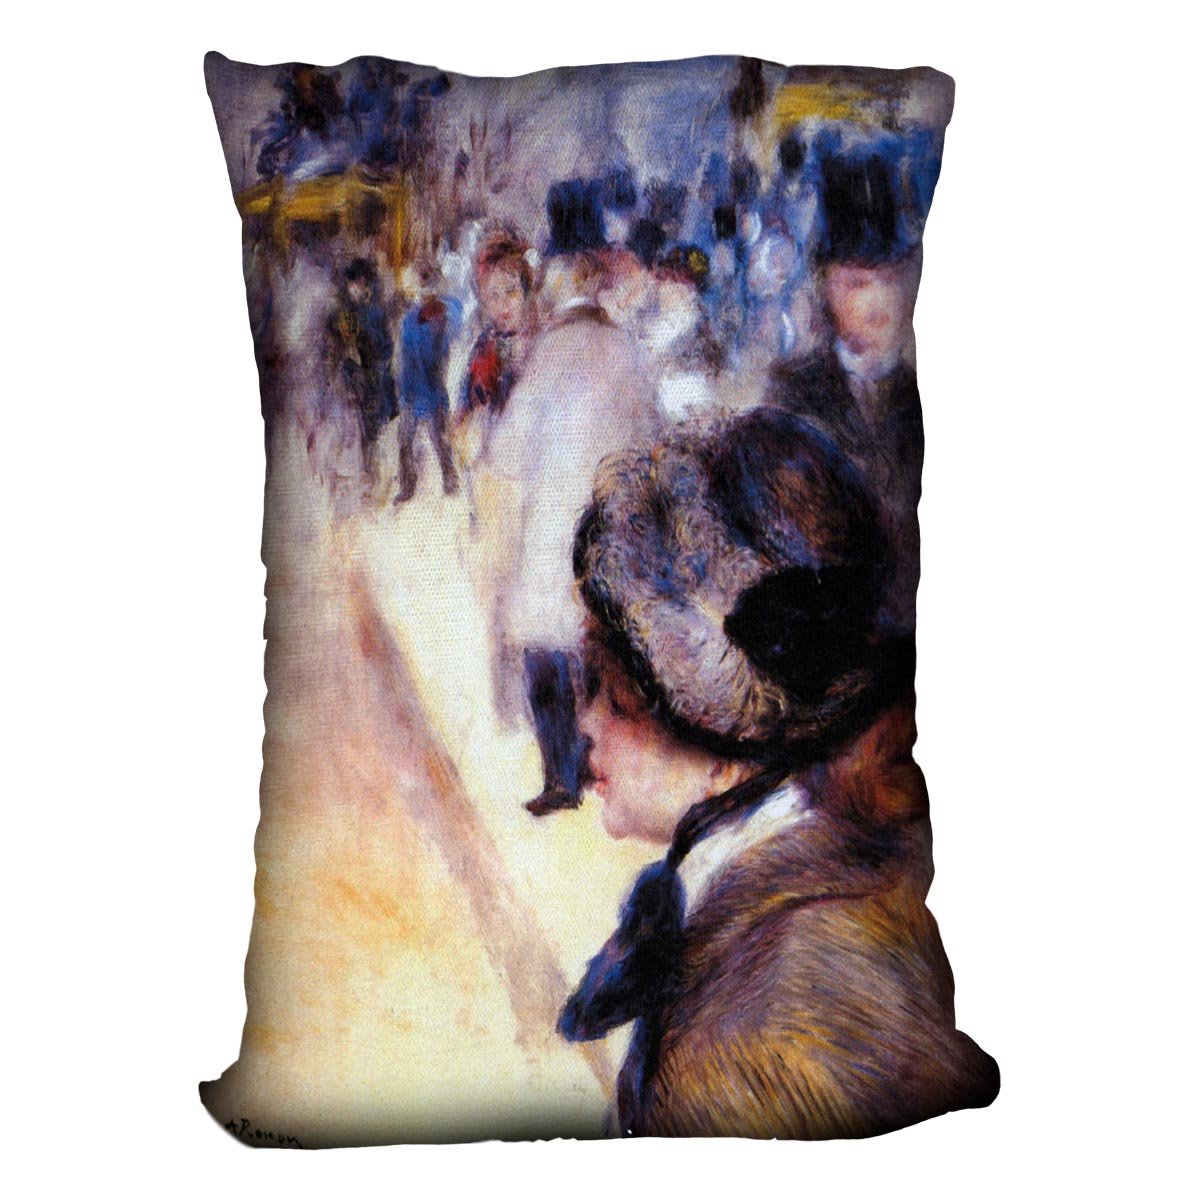 The place Clichy by Renoir Throw Pillow